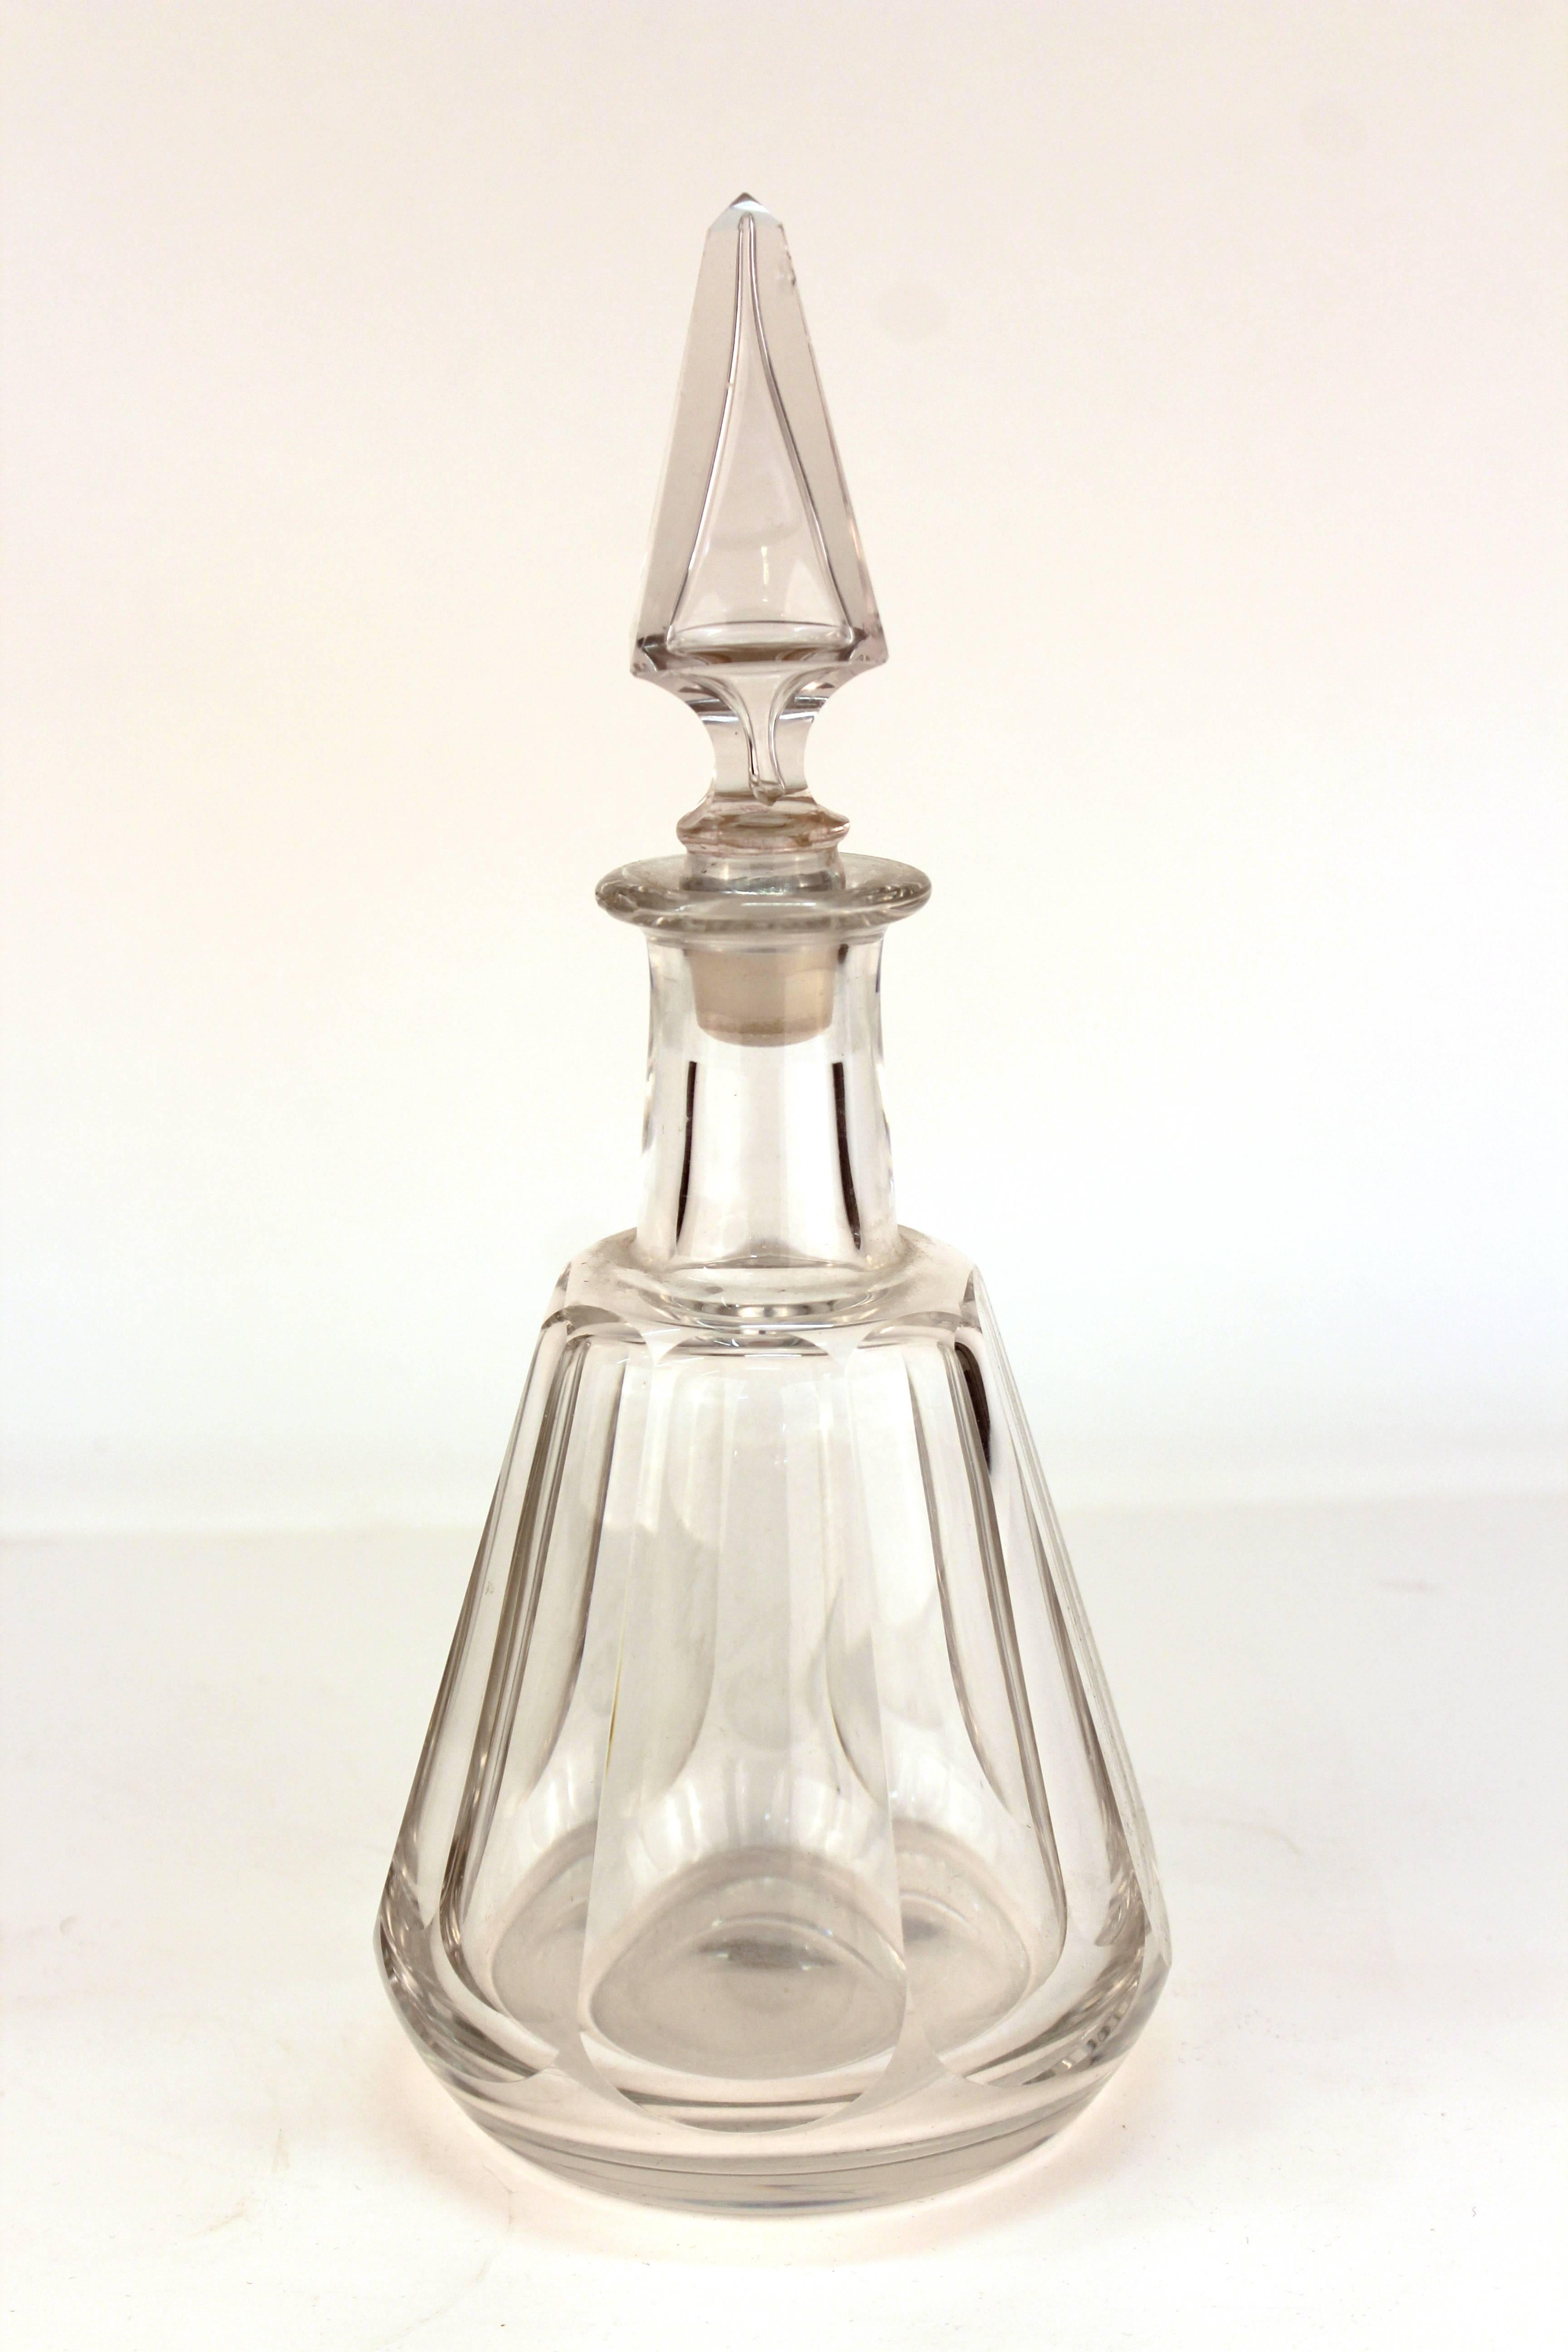 A vintage 1990s Baccarat crystal 'Talleyrand' decanter. The piece has the etched makers mark on the bottom. Some minor chips on the stopper and rim.